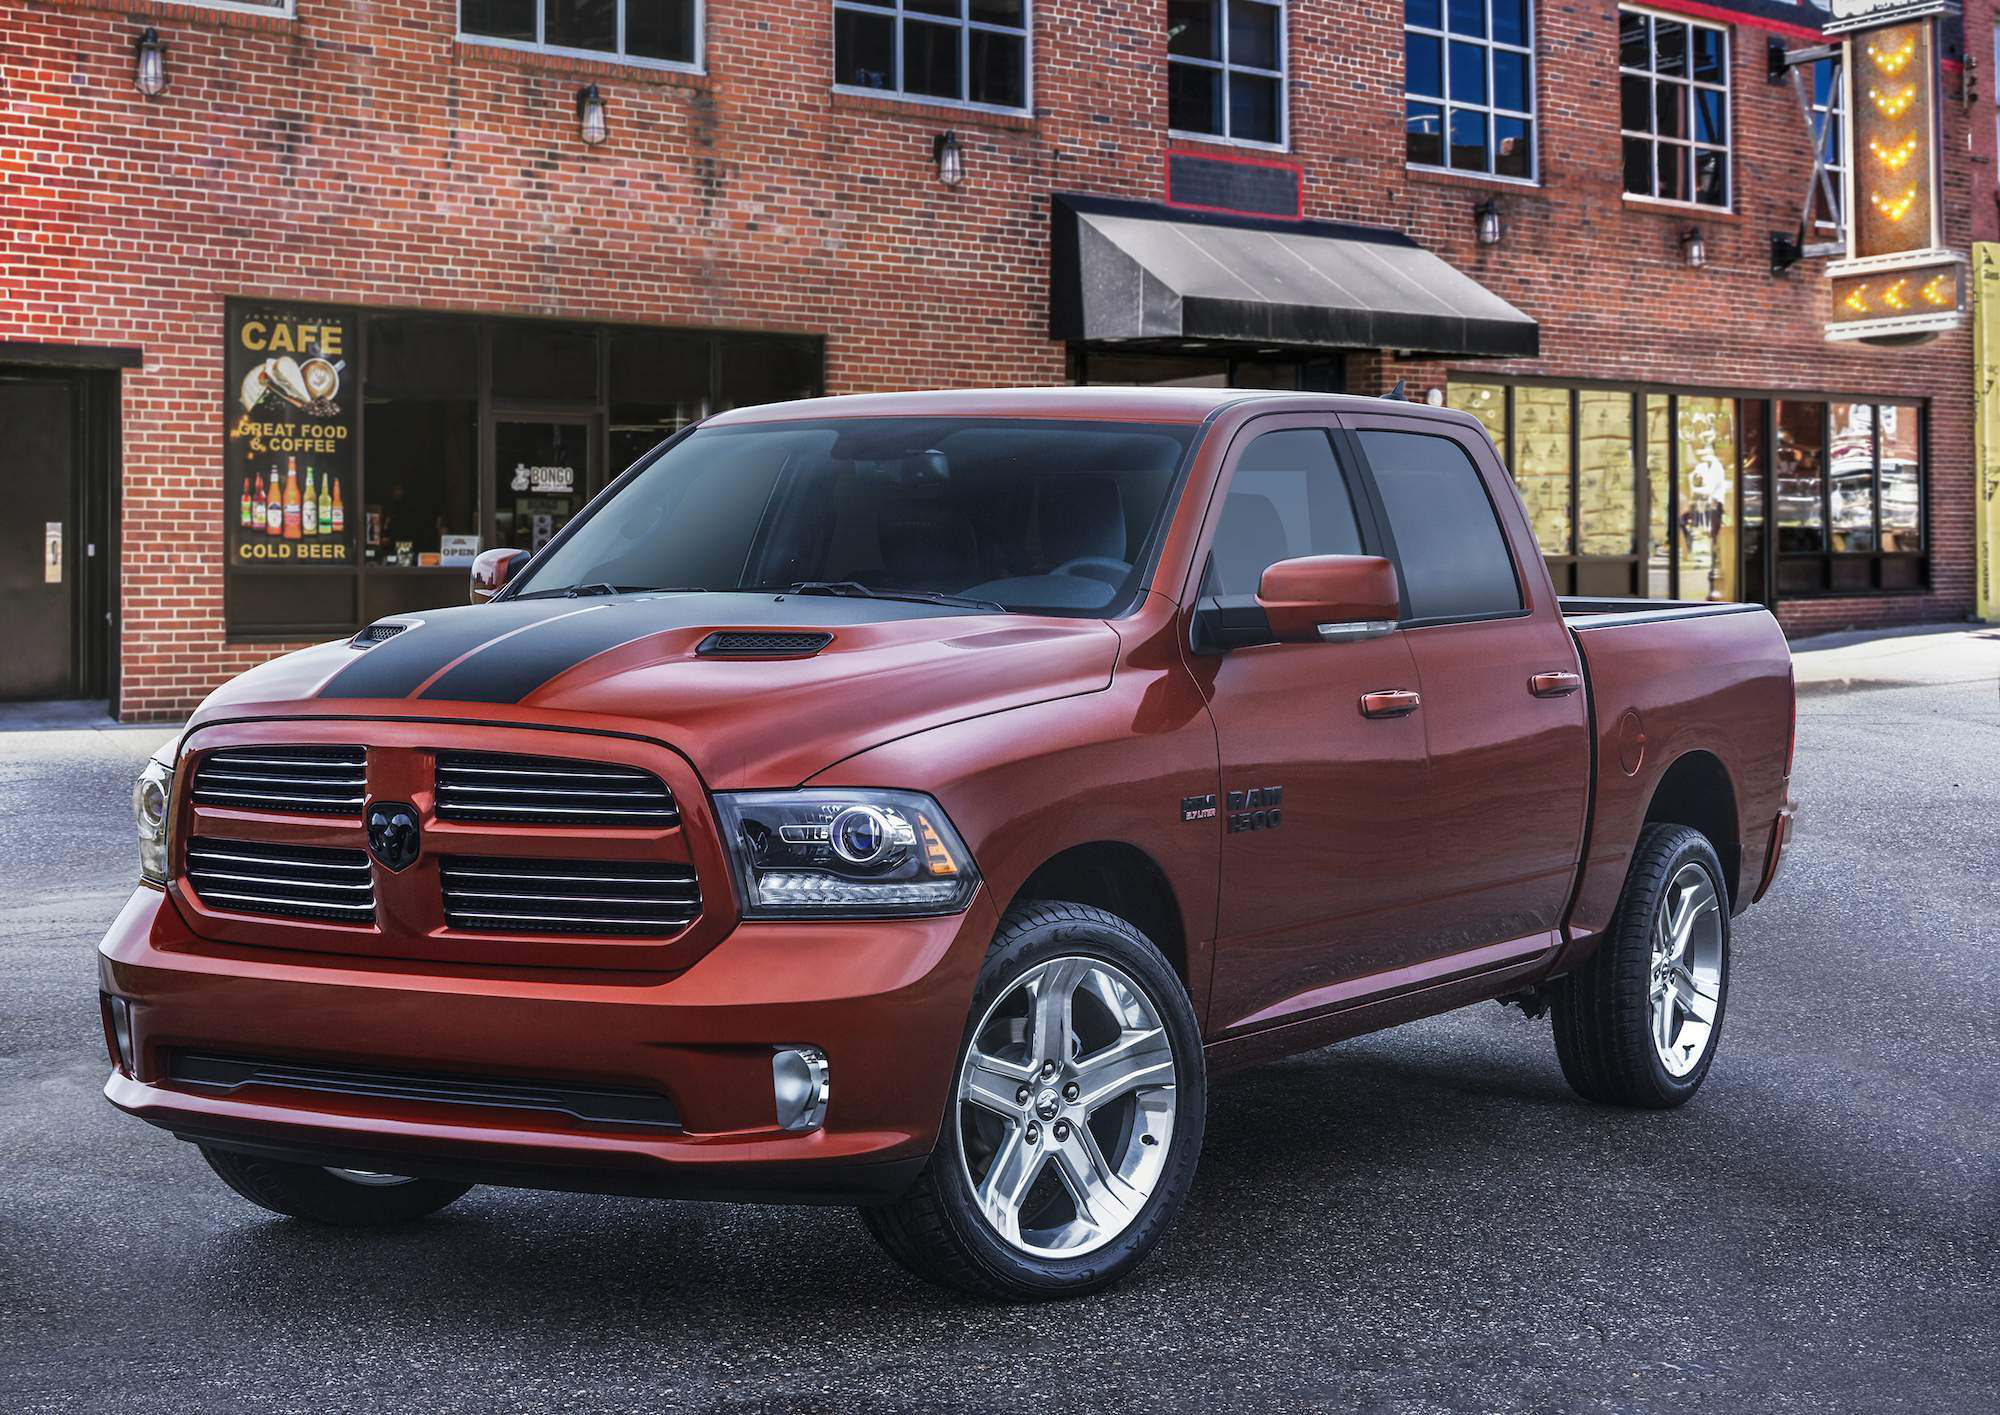 Ram unveils 1500 Copper Sport limited edition, new 2tone